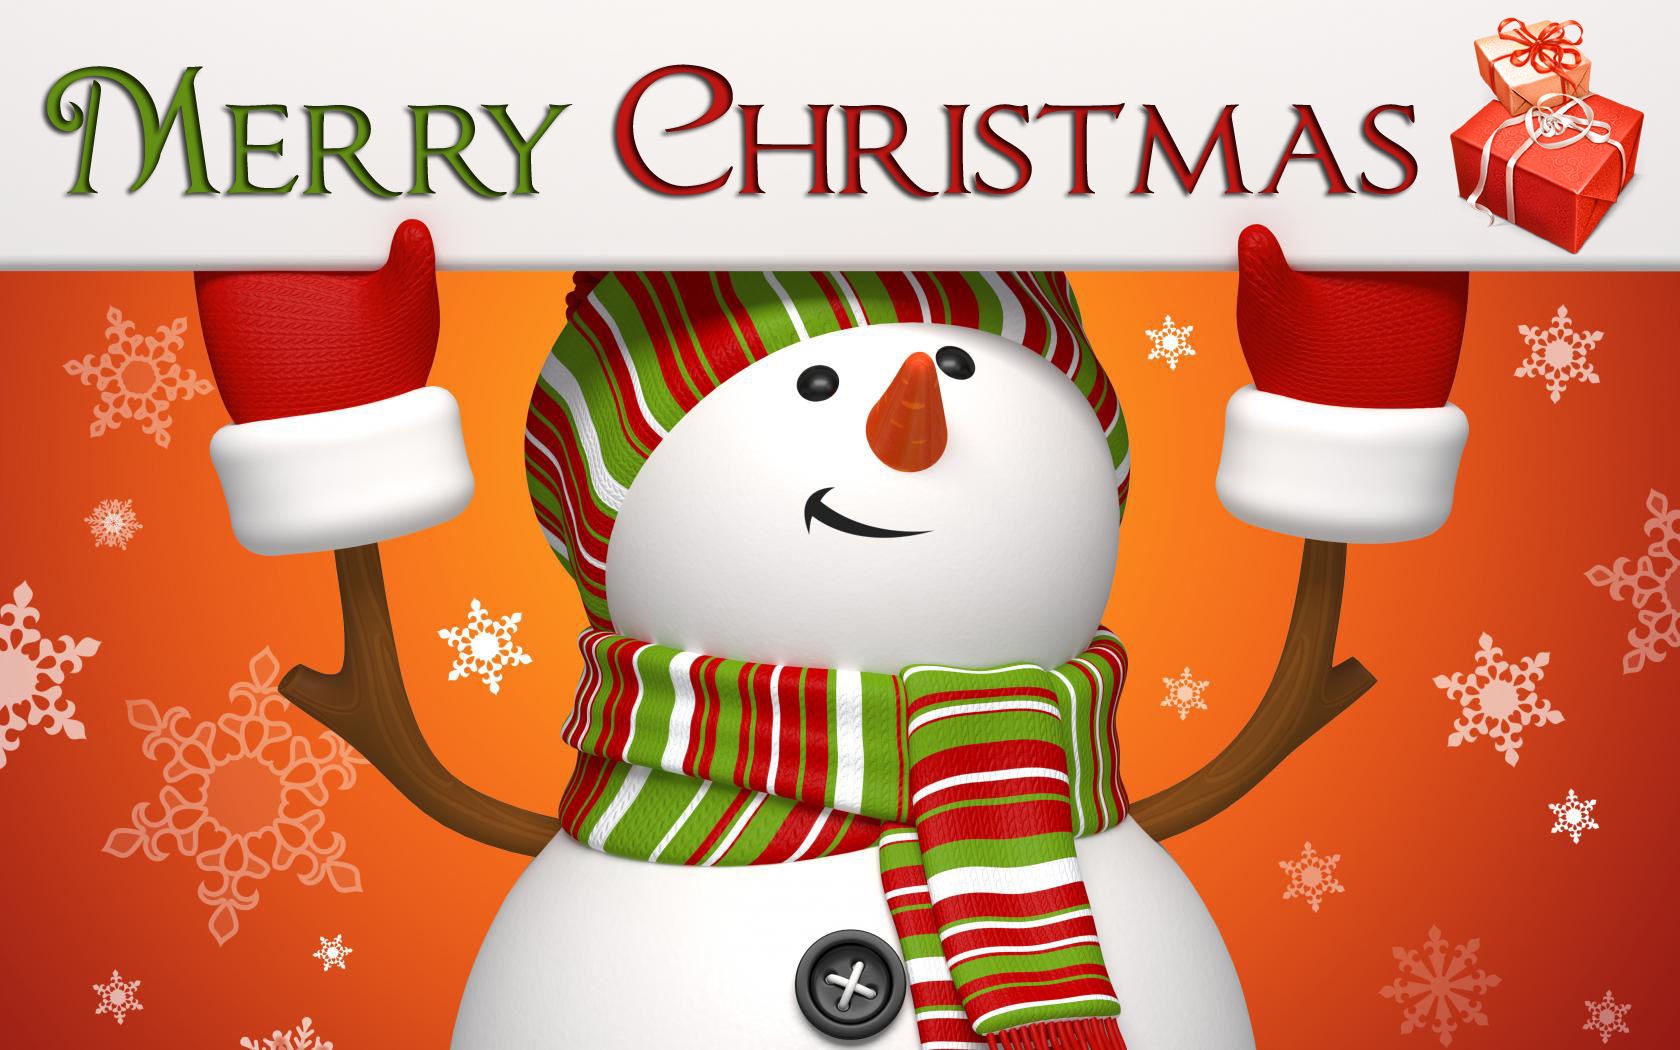  Greetings Quotes For Christmas “By Christmas Snowman”